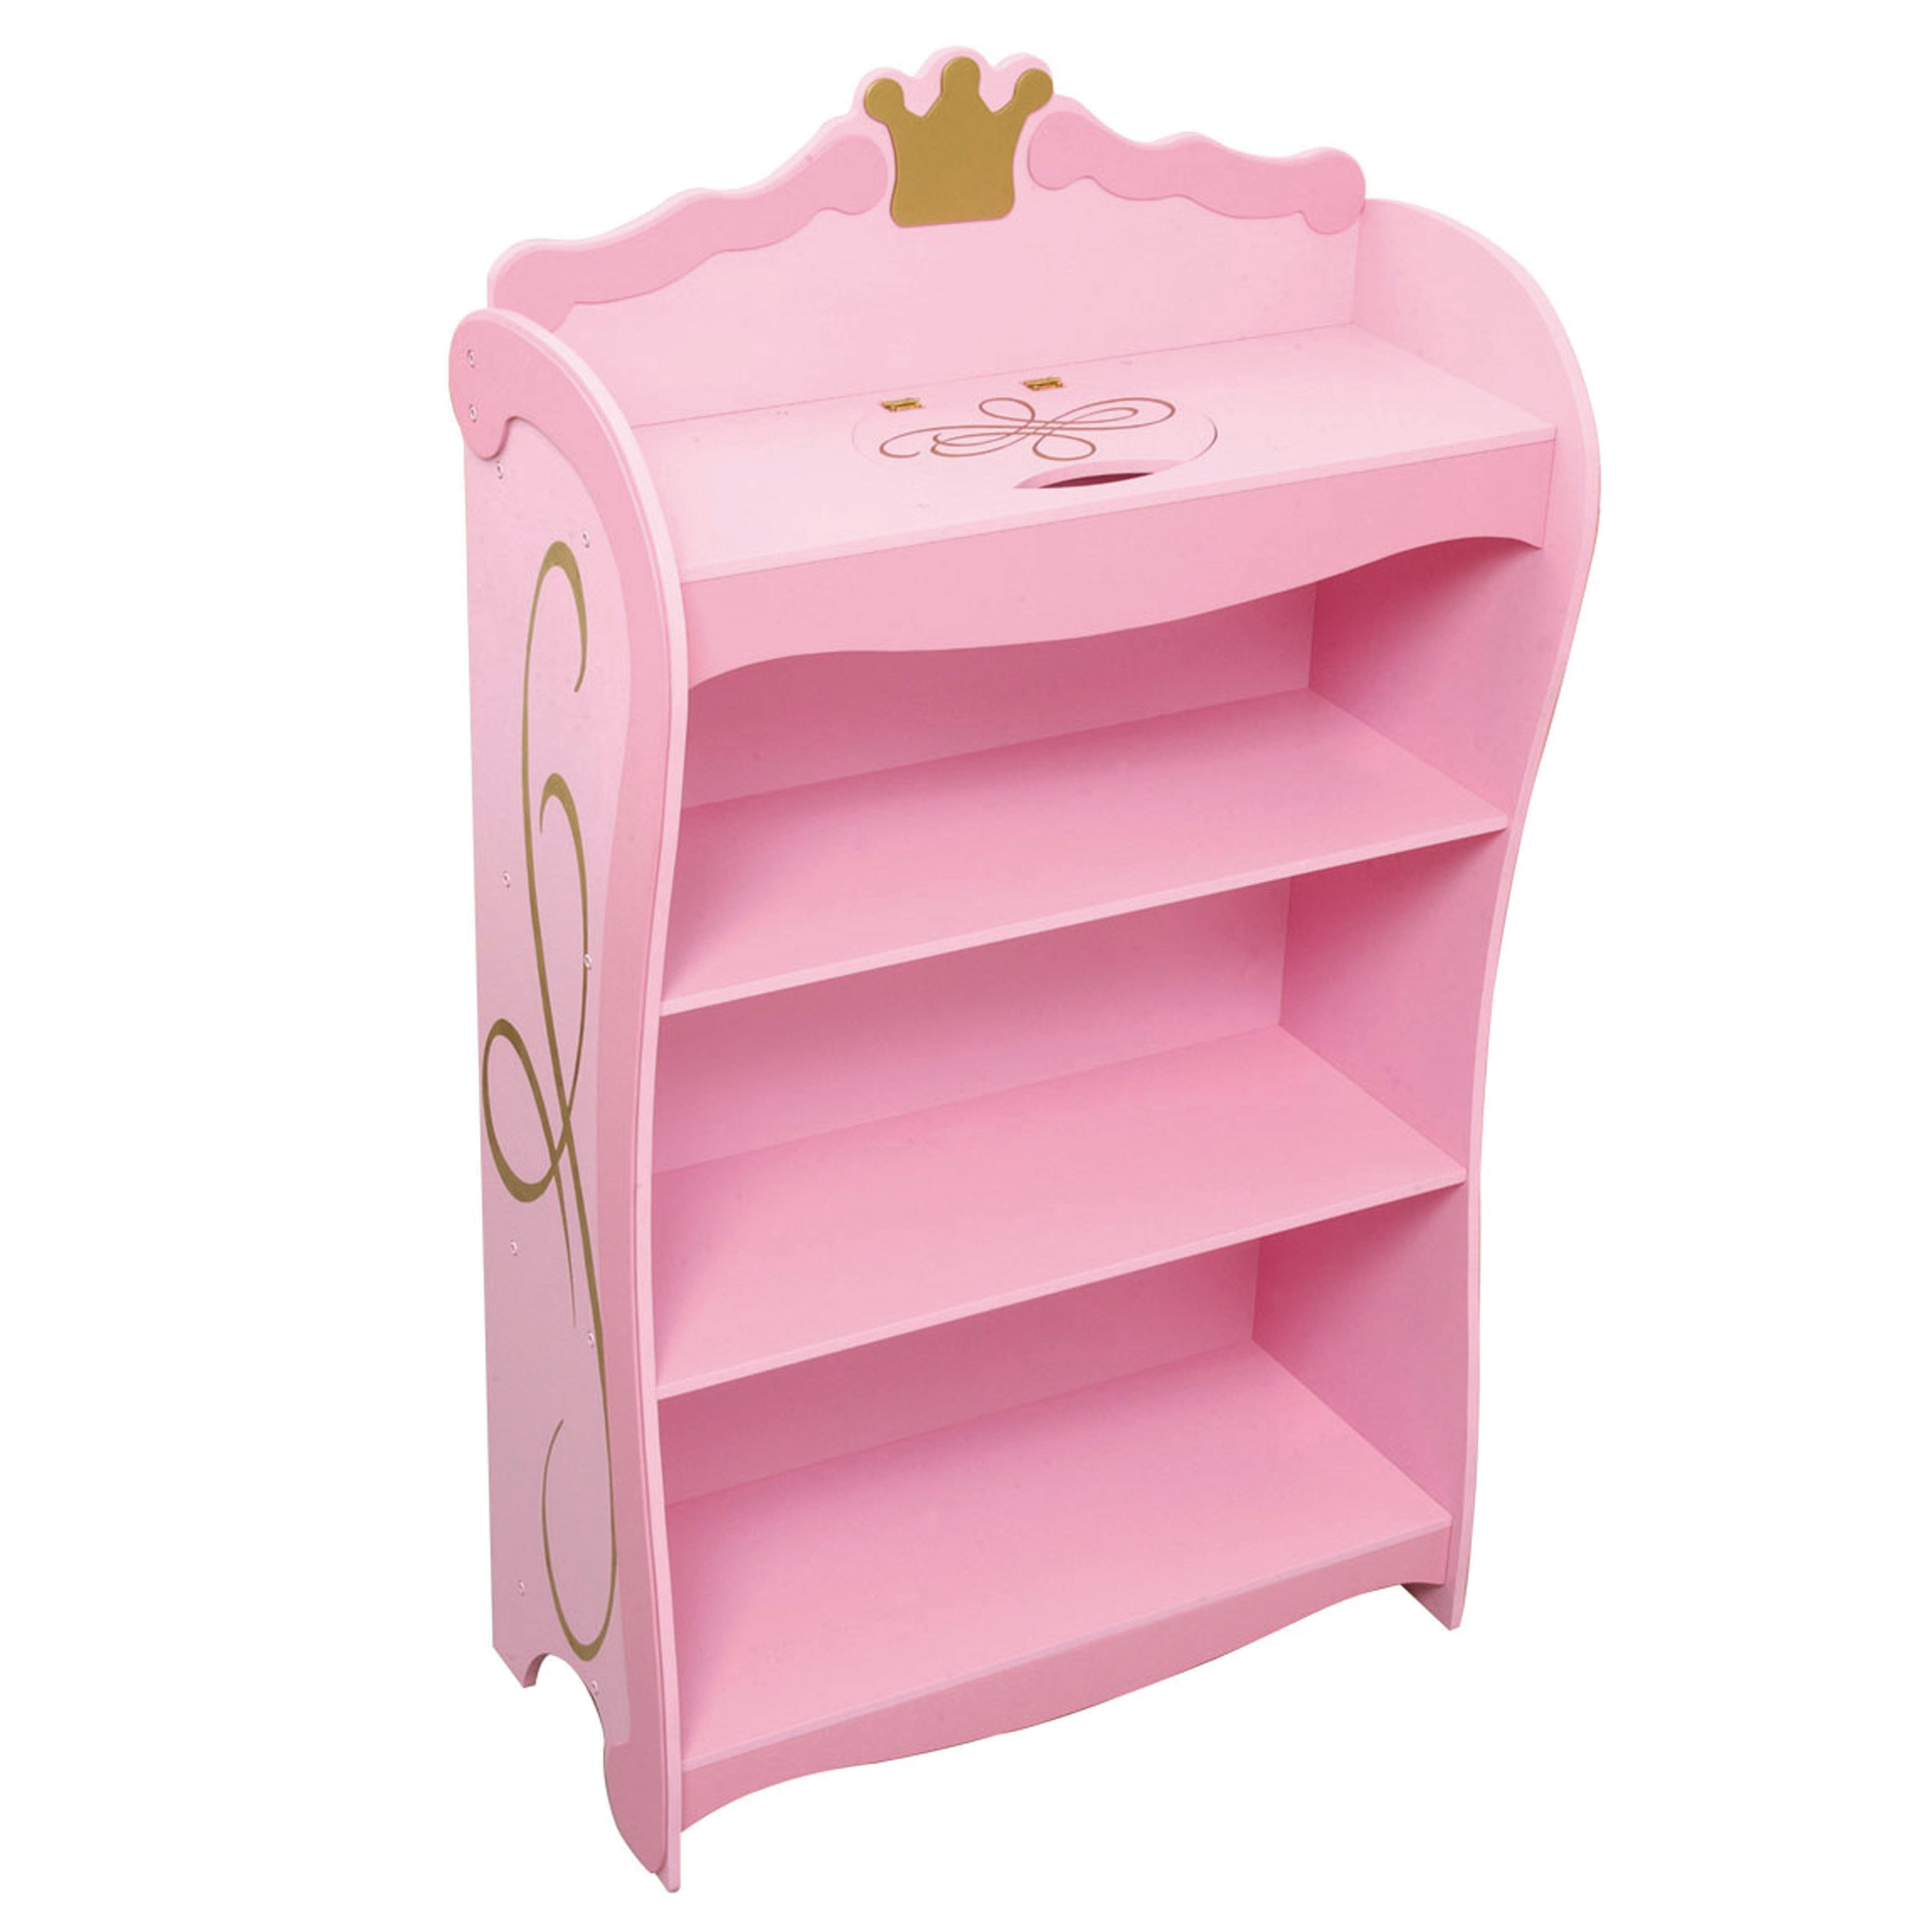 KidKraft Wooden Princess Bookcase with Crown Accent, Shelves and Hidden Storage - Pink - image 1 of 2